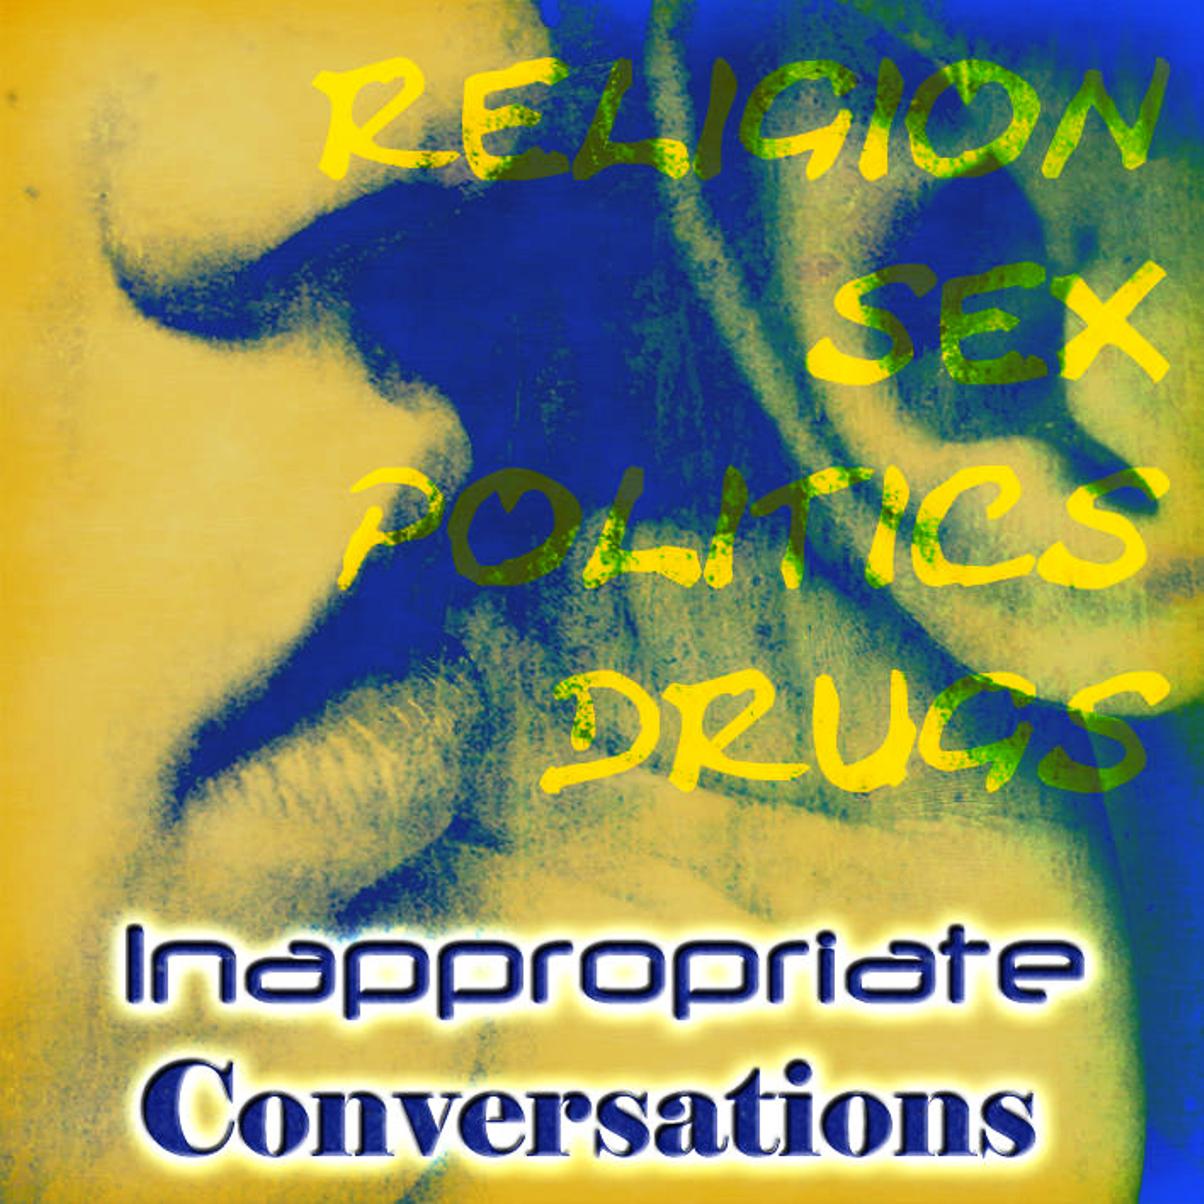 Promo for Inappropriate Conversations (1:22)